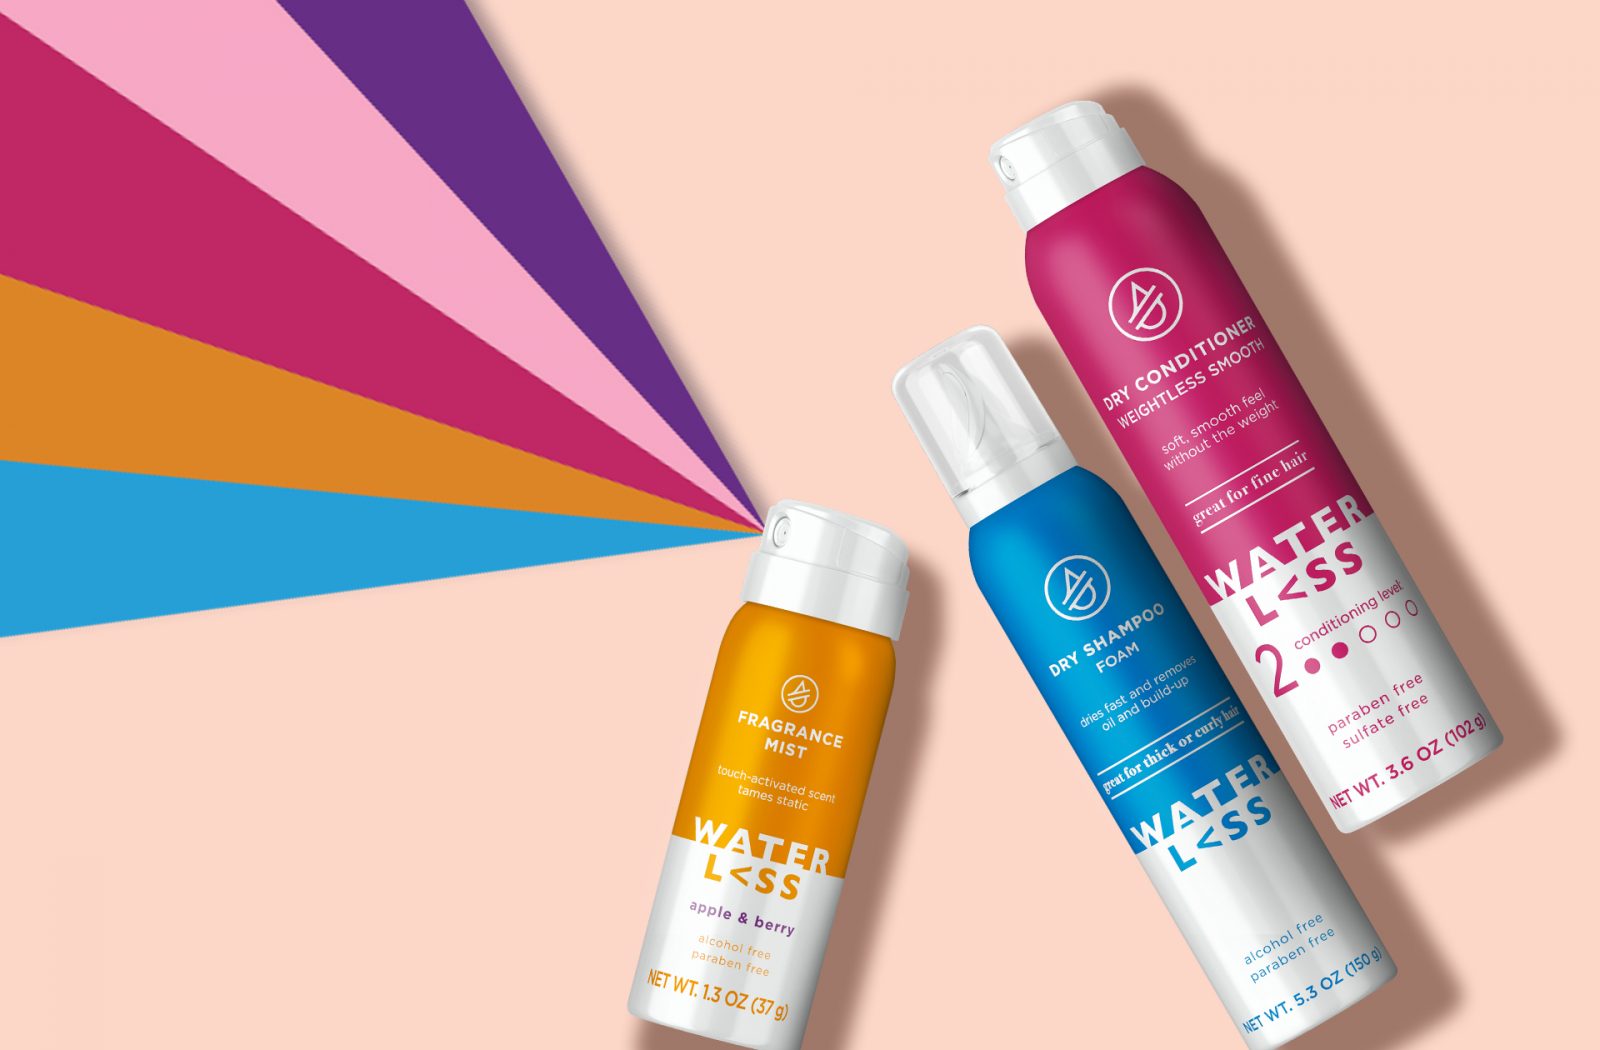 Render of three different waterless hair care products, showcasing packaging design services for consumer packaged goods.